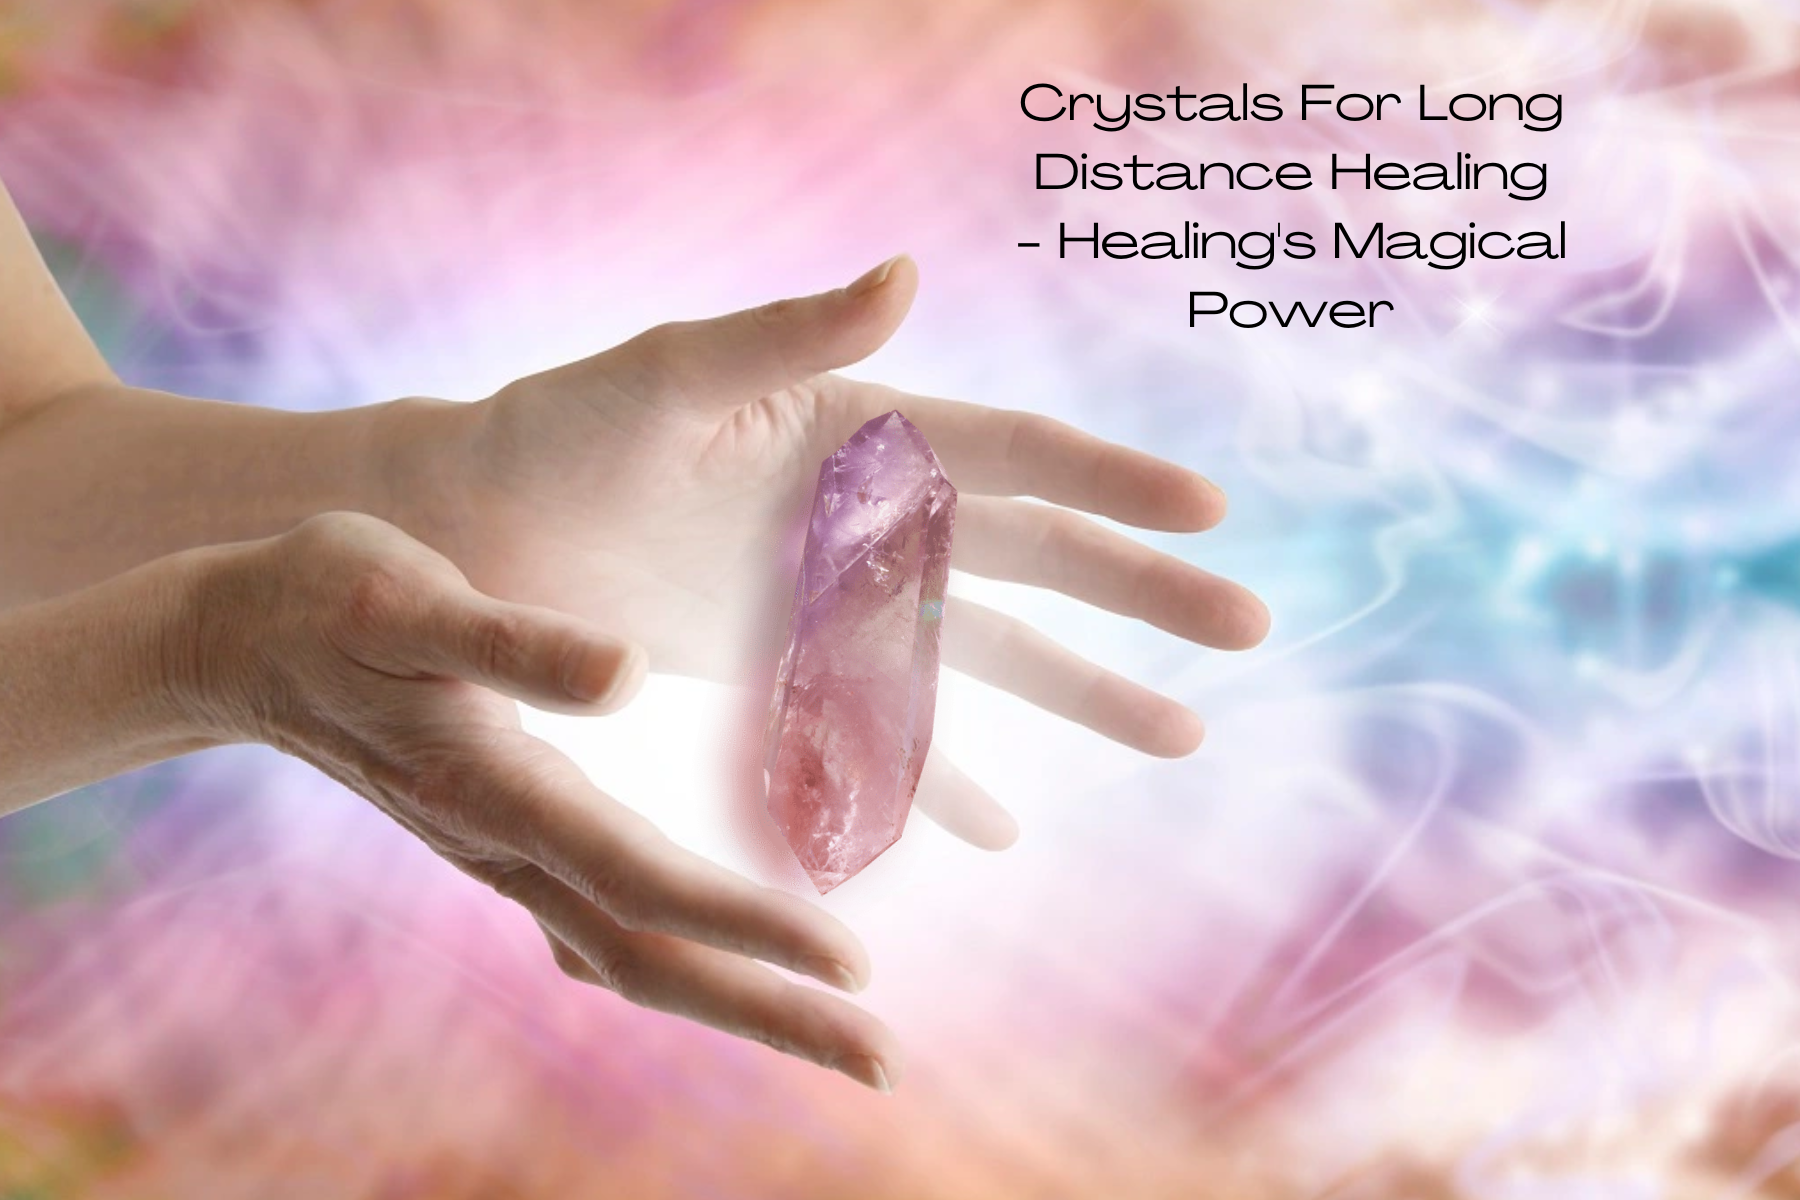 Crystals For Long Distance Healing - Healing's Magical Power